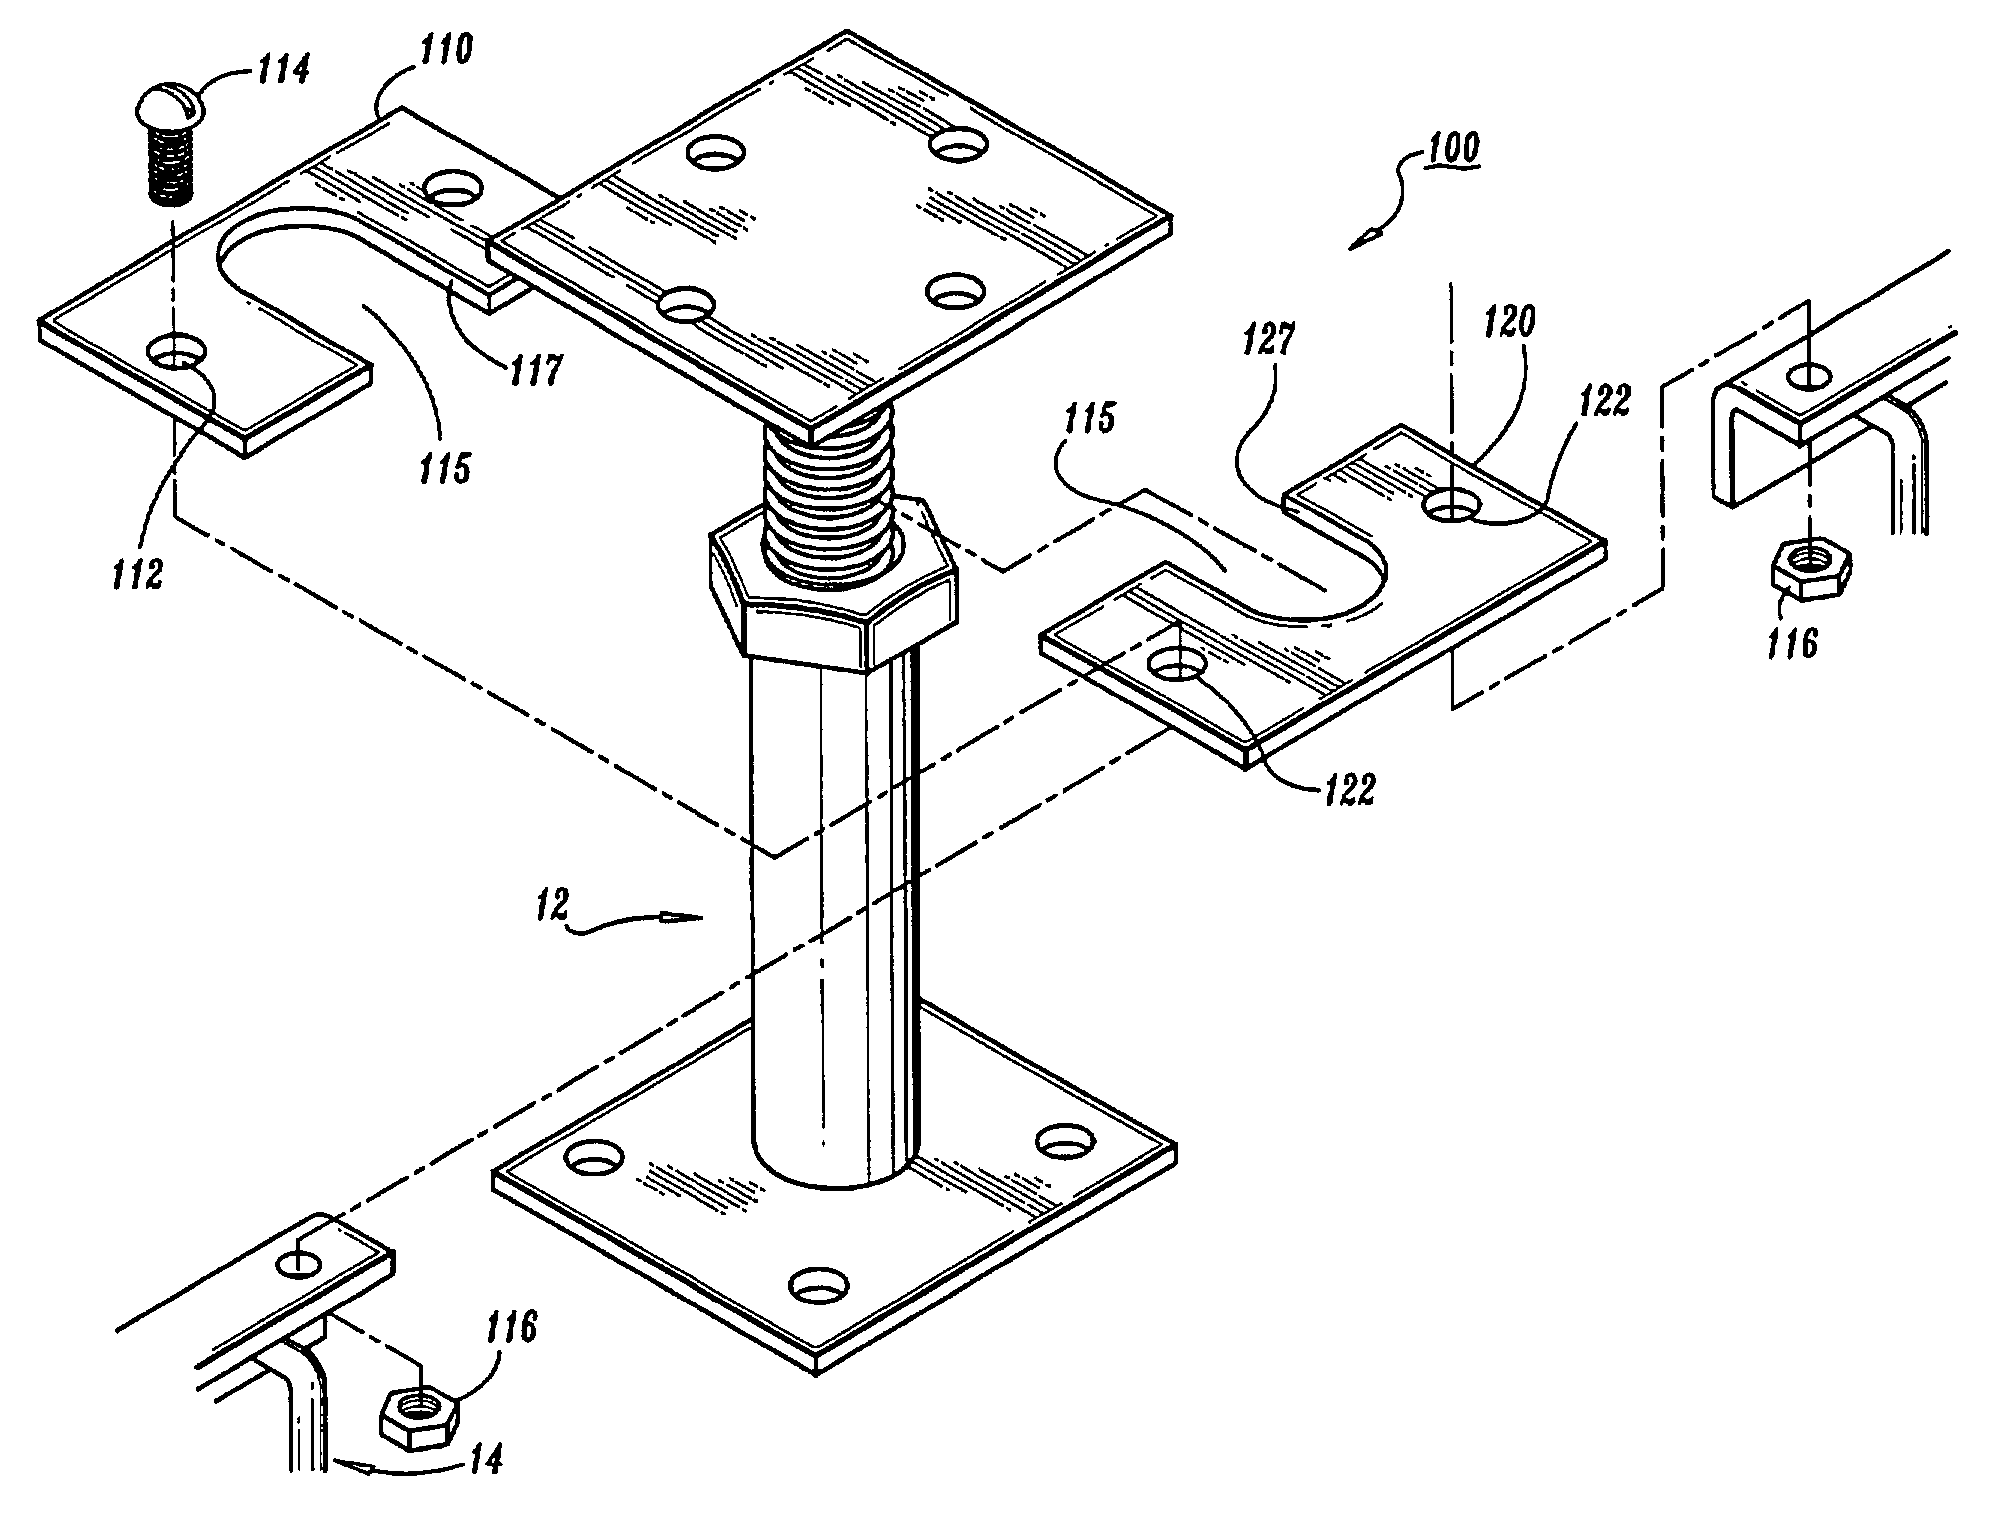 Cable support apparatus for a raised floor system